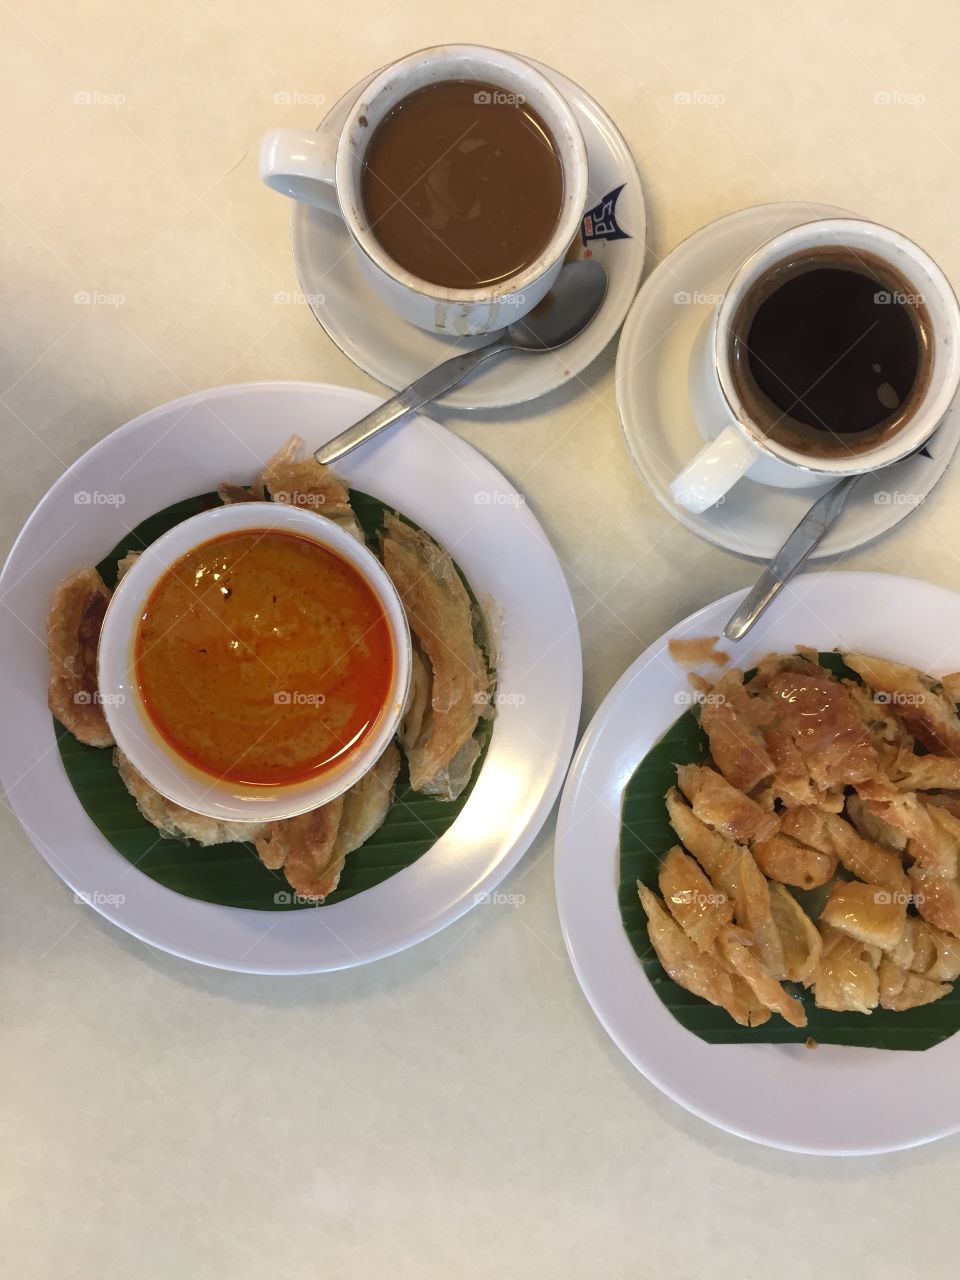 snack of west sumatra Restaurant calls Roti Cane eaten with curry sauce with coffee C